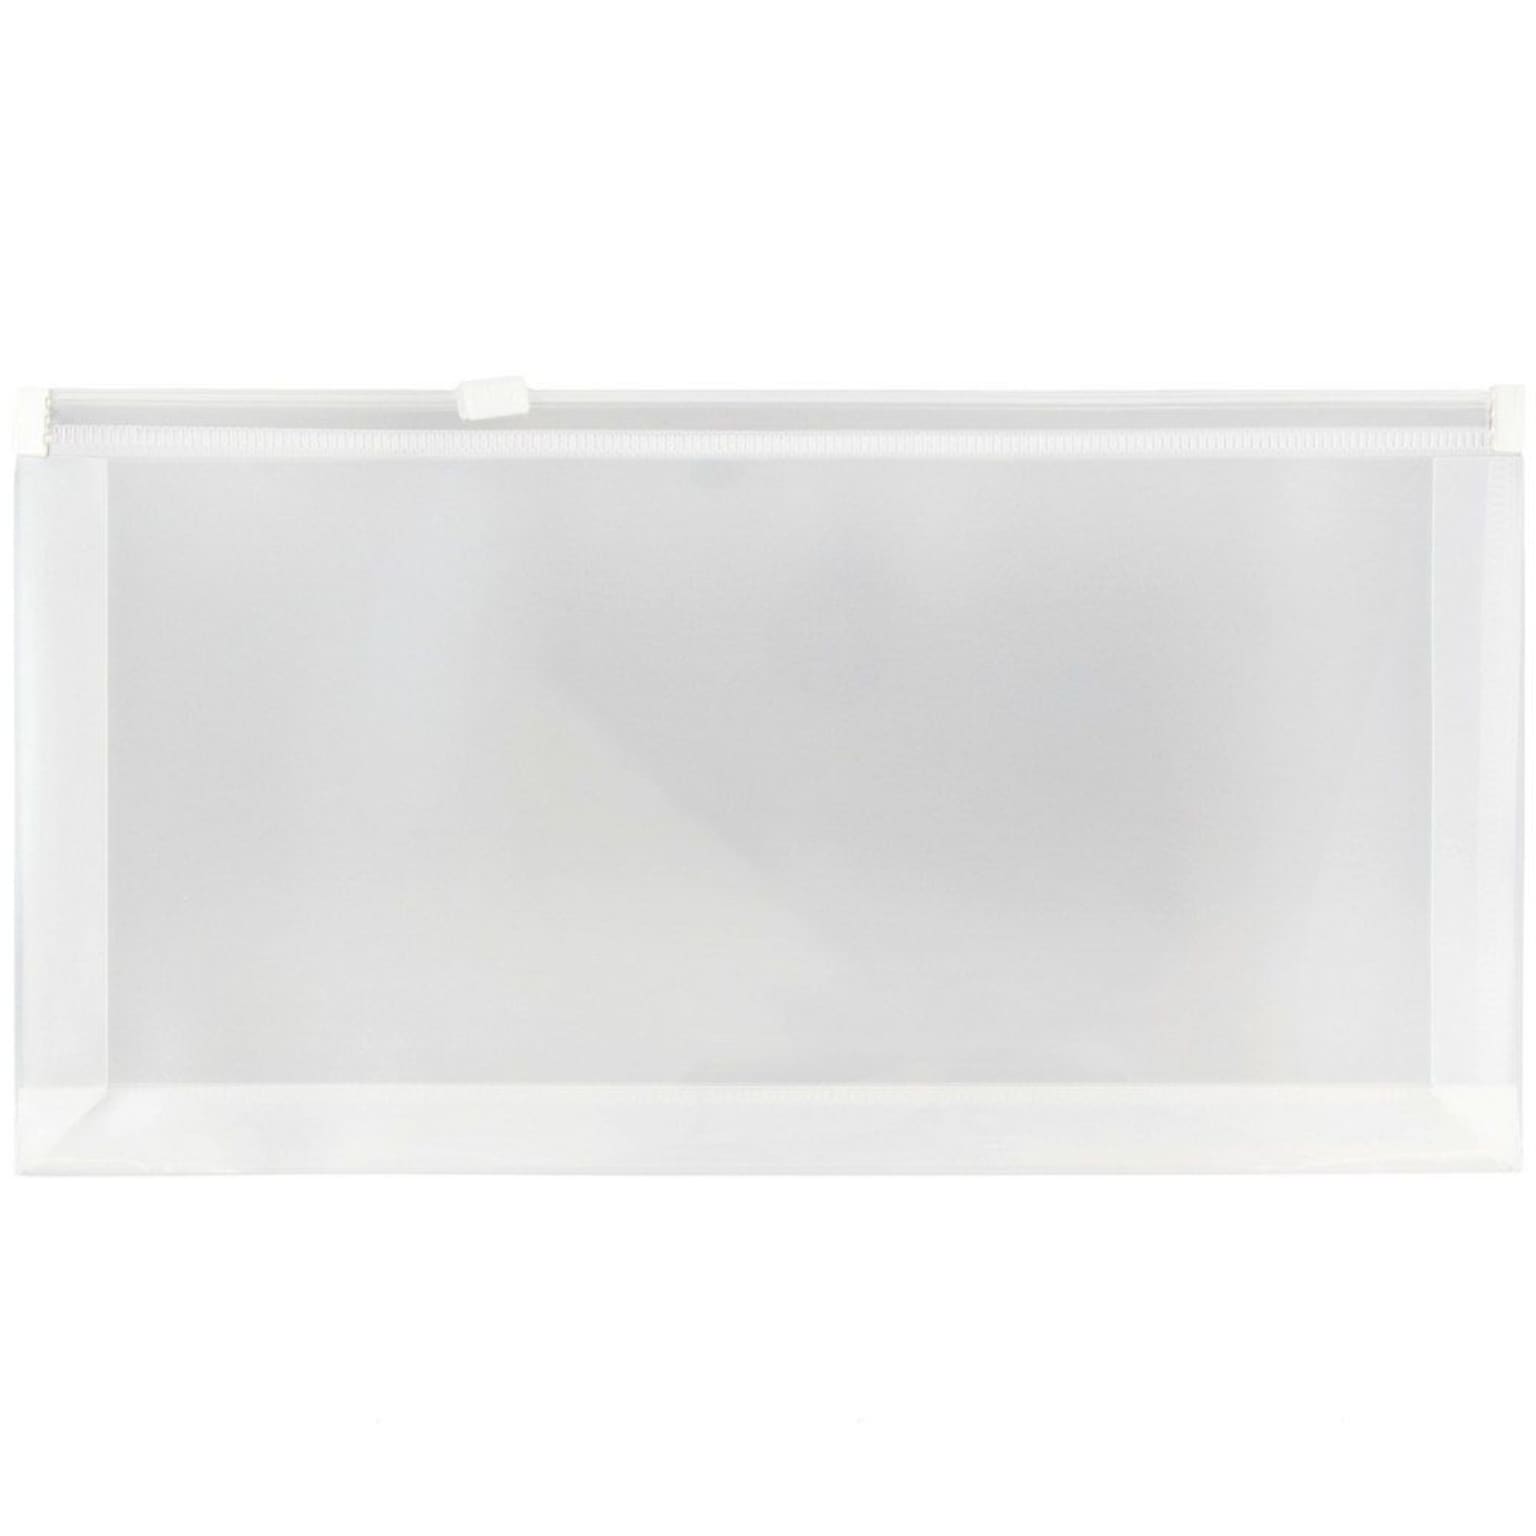 JAM Paper® #10 Plastic Envelopes with Zip Closure, 5 x 10, Clear Poly, 12/pack (921Z1CL)